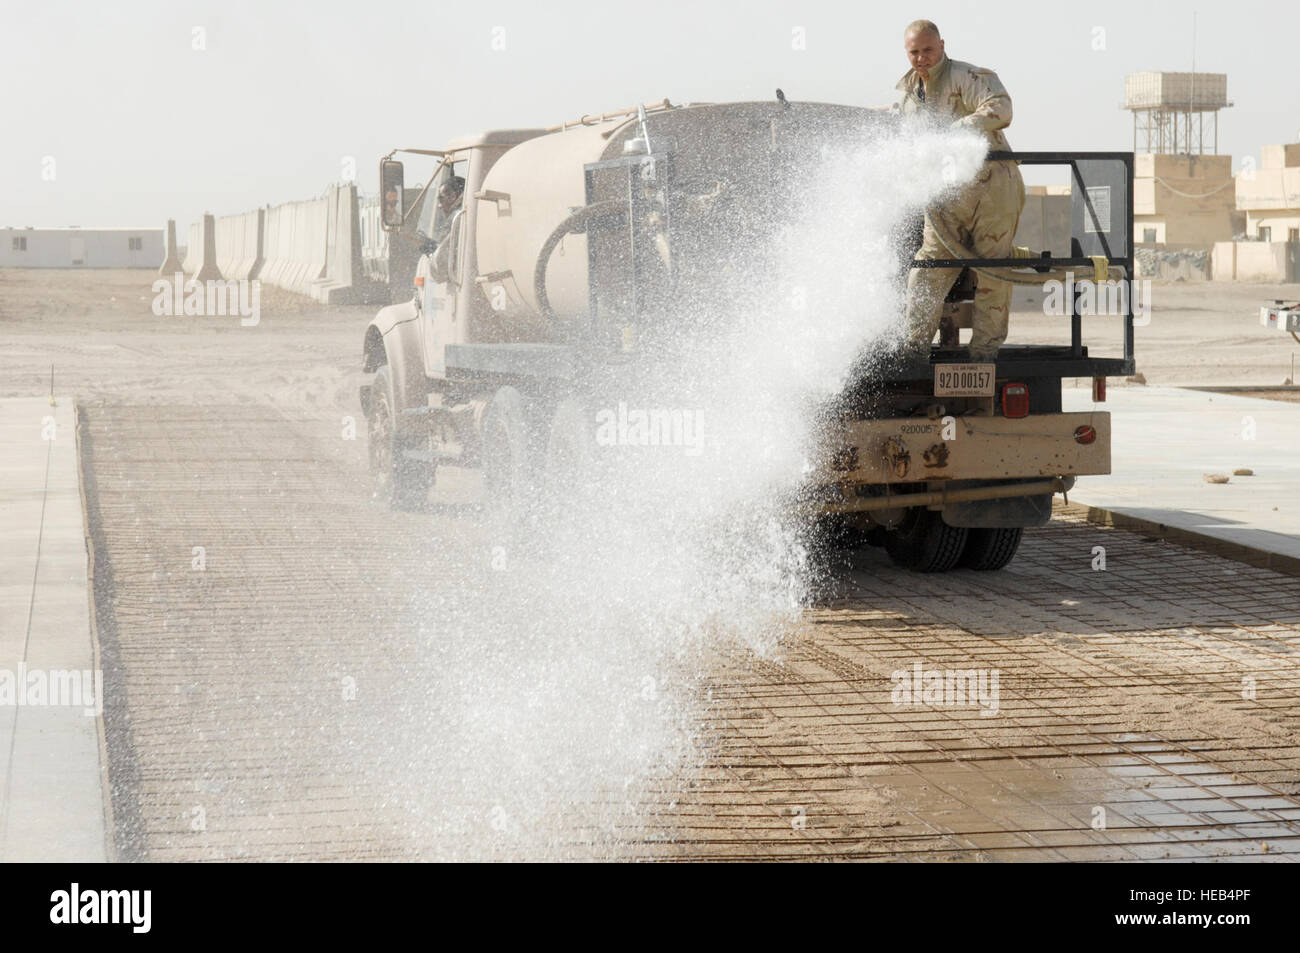 Senior Airman Carl Perkins, a 'Dirt Boy' from the 407th Expeditionary Civil Engineer Squadron (ECES), Ali Air Base, Iraq, sprays down the road before his team begins to lay cement for a pad at Camp Mittica, Iraq, on June 11, 2007.  The 407th ECES is on the Iraqi base building a 220 foot by 200 foot cement drill pad that will be used by the Iraqi army to train their enlisted soldiers. Stock Photo